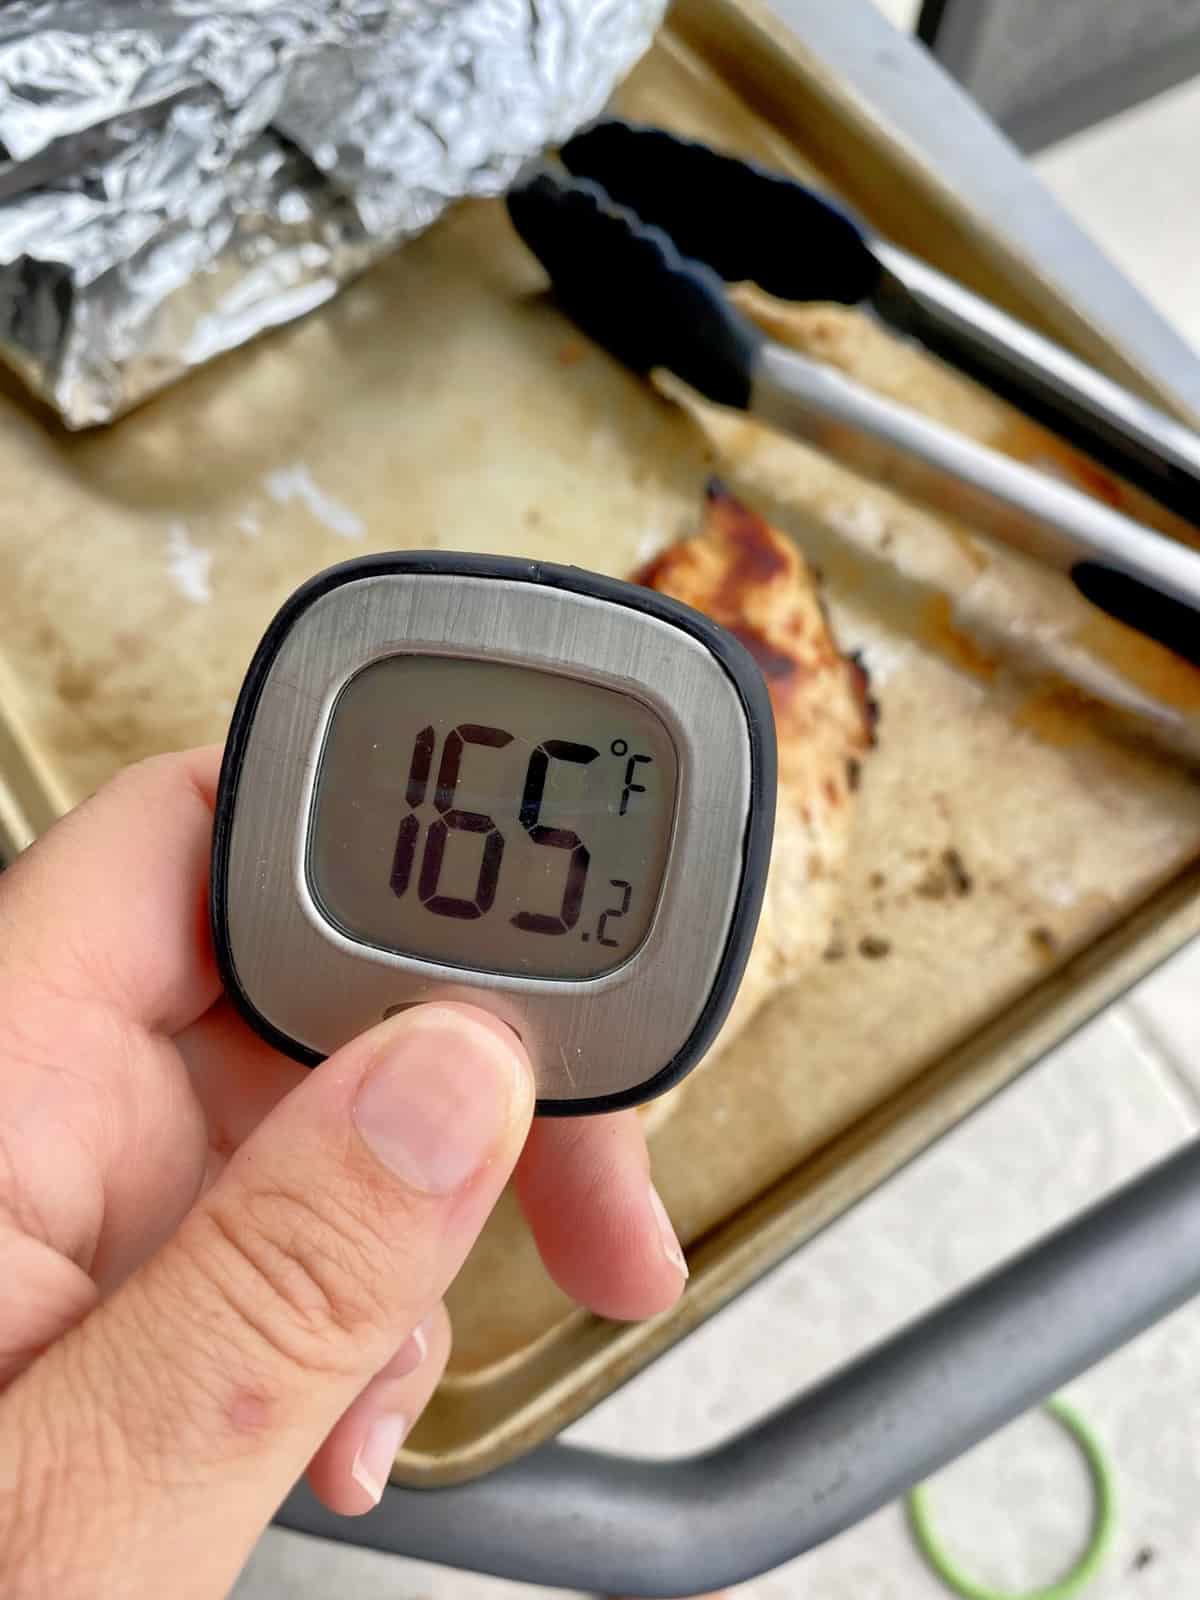 Hand holding meat thermometer reading 165 degrees Fahrenheit.